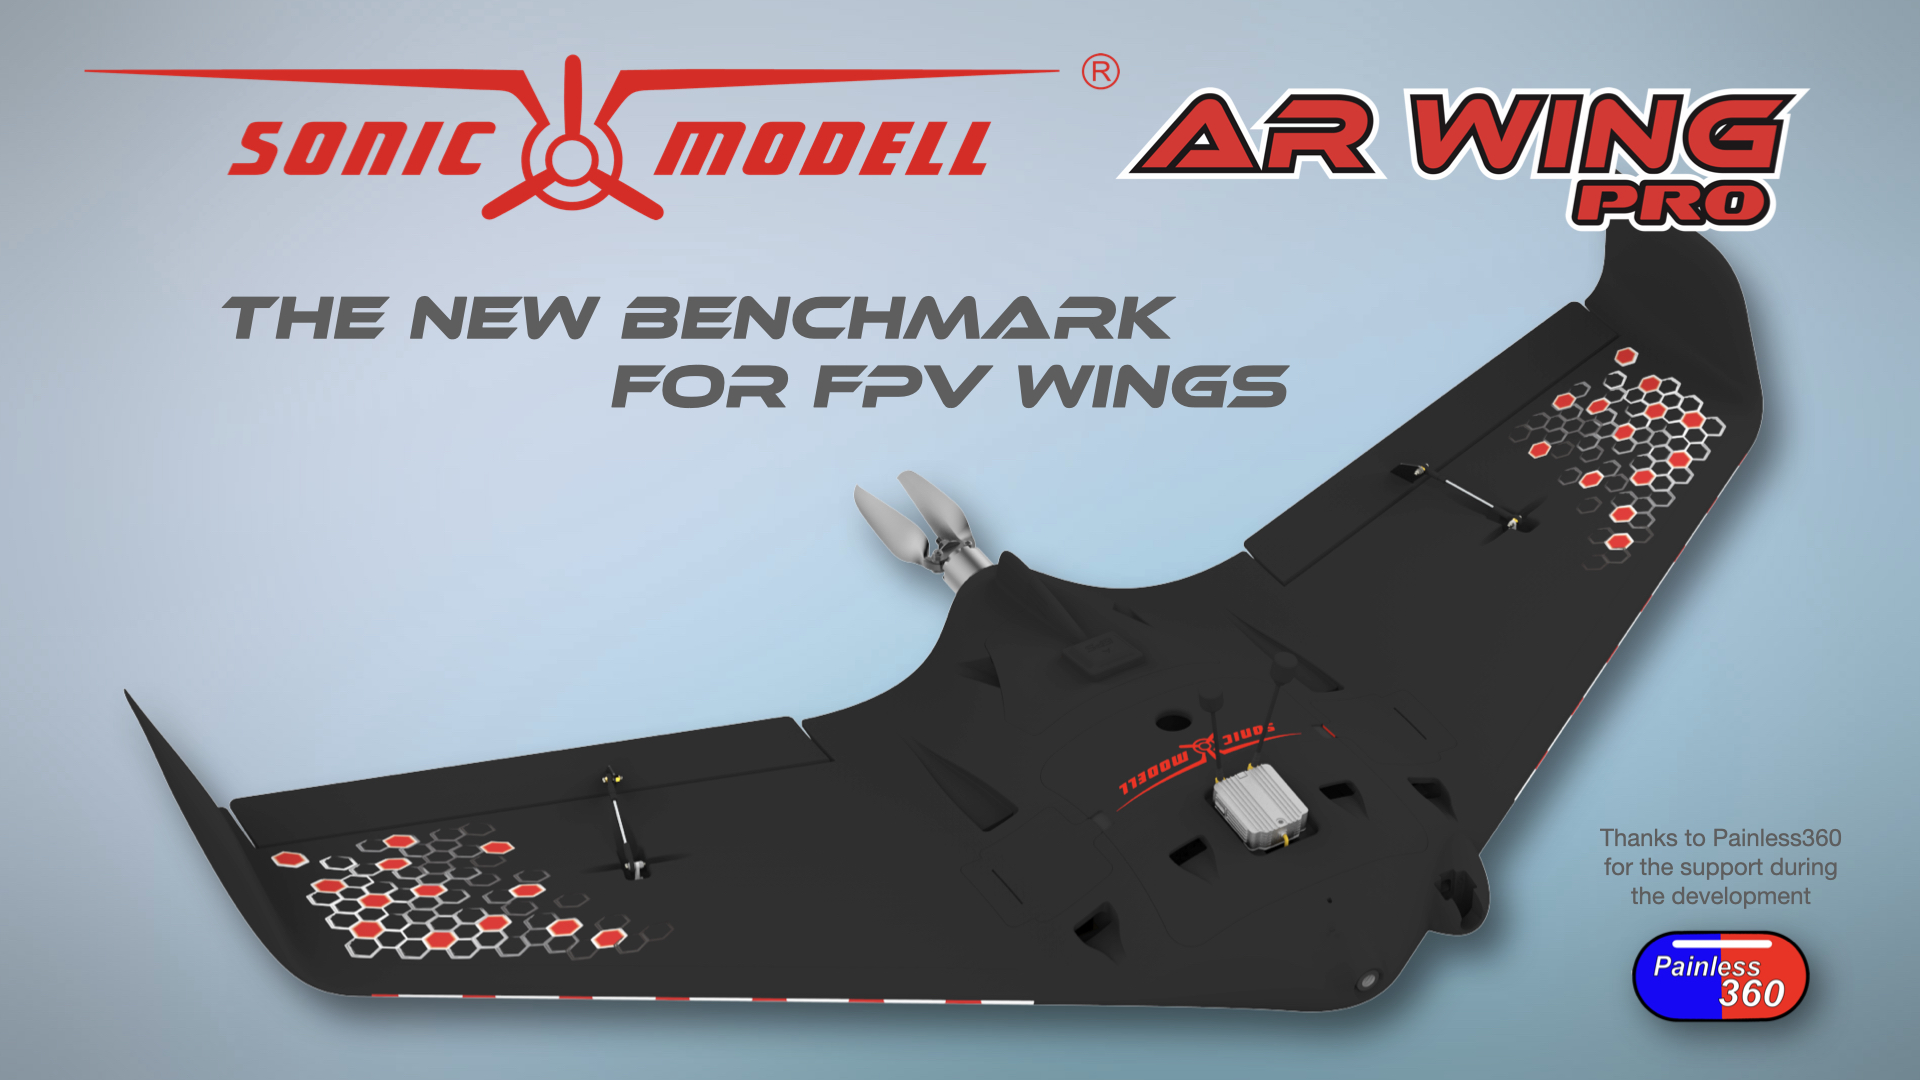 Sonicmodell-AR-Wing-Pro-1000mm-Wingspan-EPP-FPV-Flying-Wing-RC-Airplane-KITPNP-1756841-1